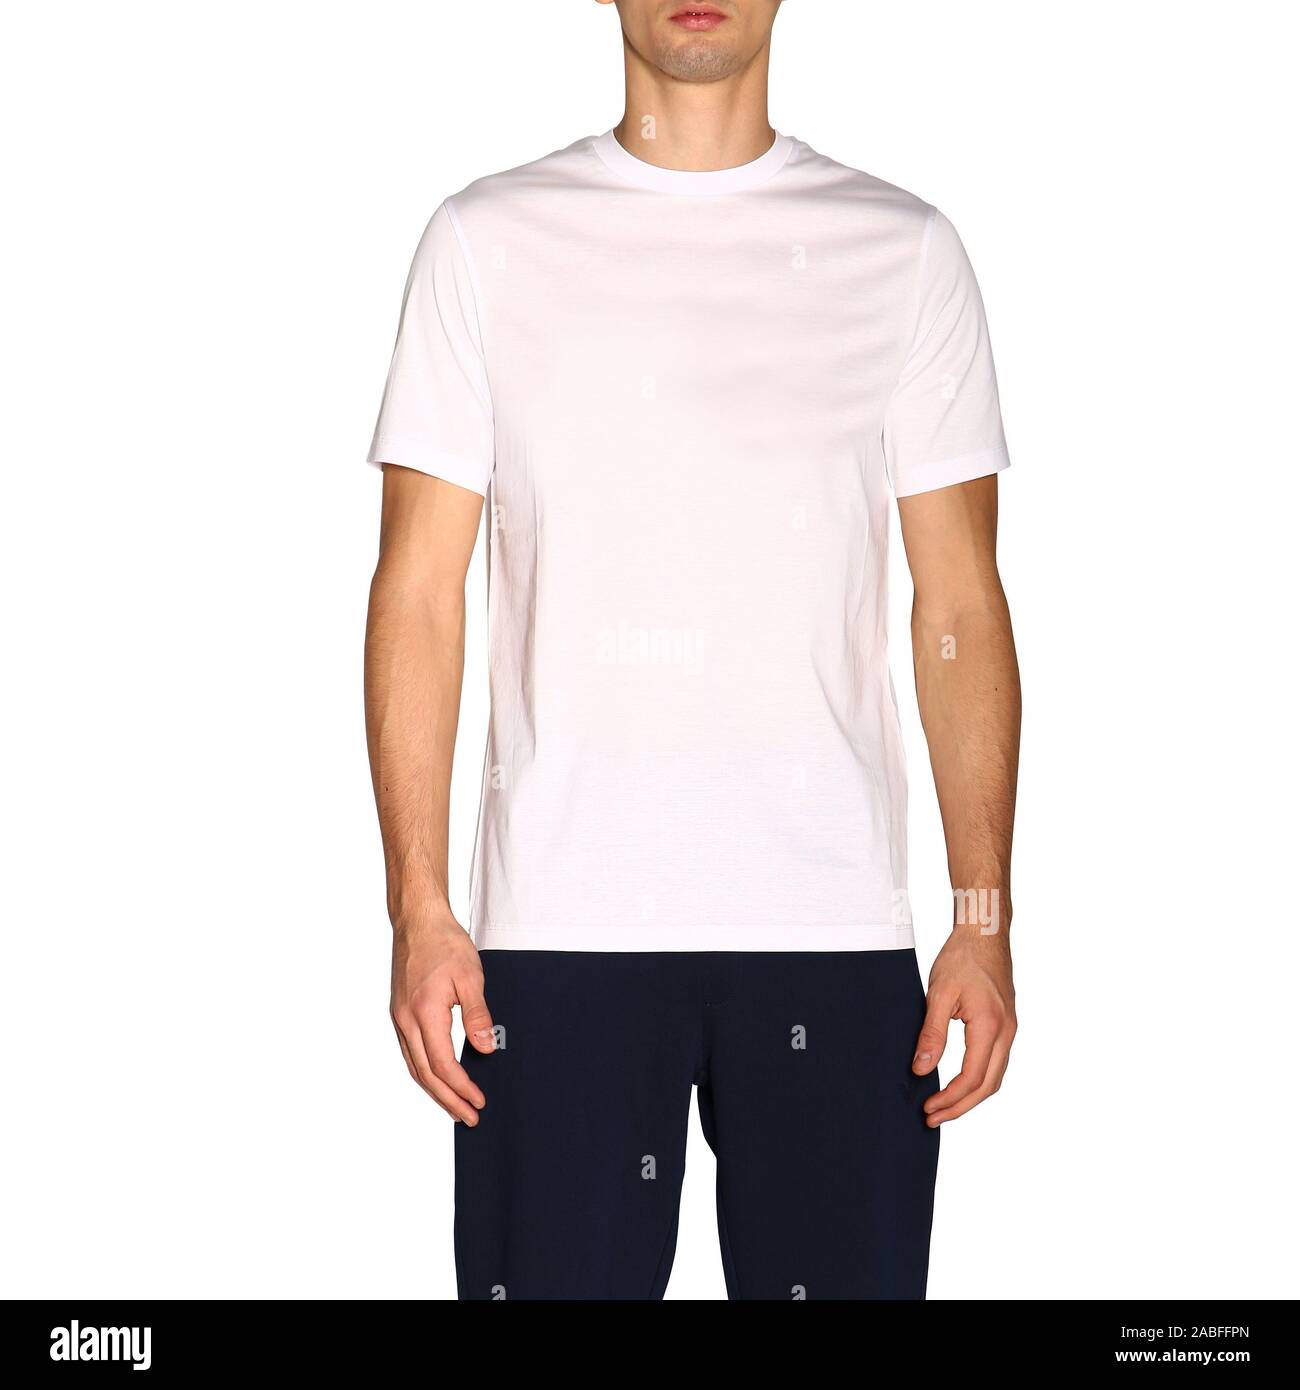 White t-shirt mock up,front view, isolated on white background. Male model wear plain white shirt mock-up and black pant.white shirt design template. Stock Photo